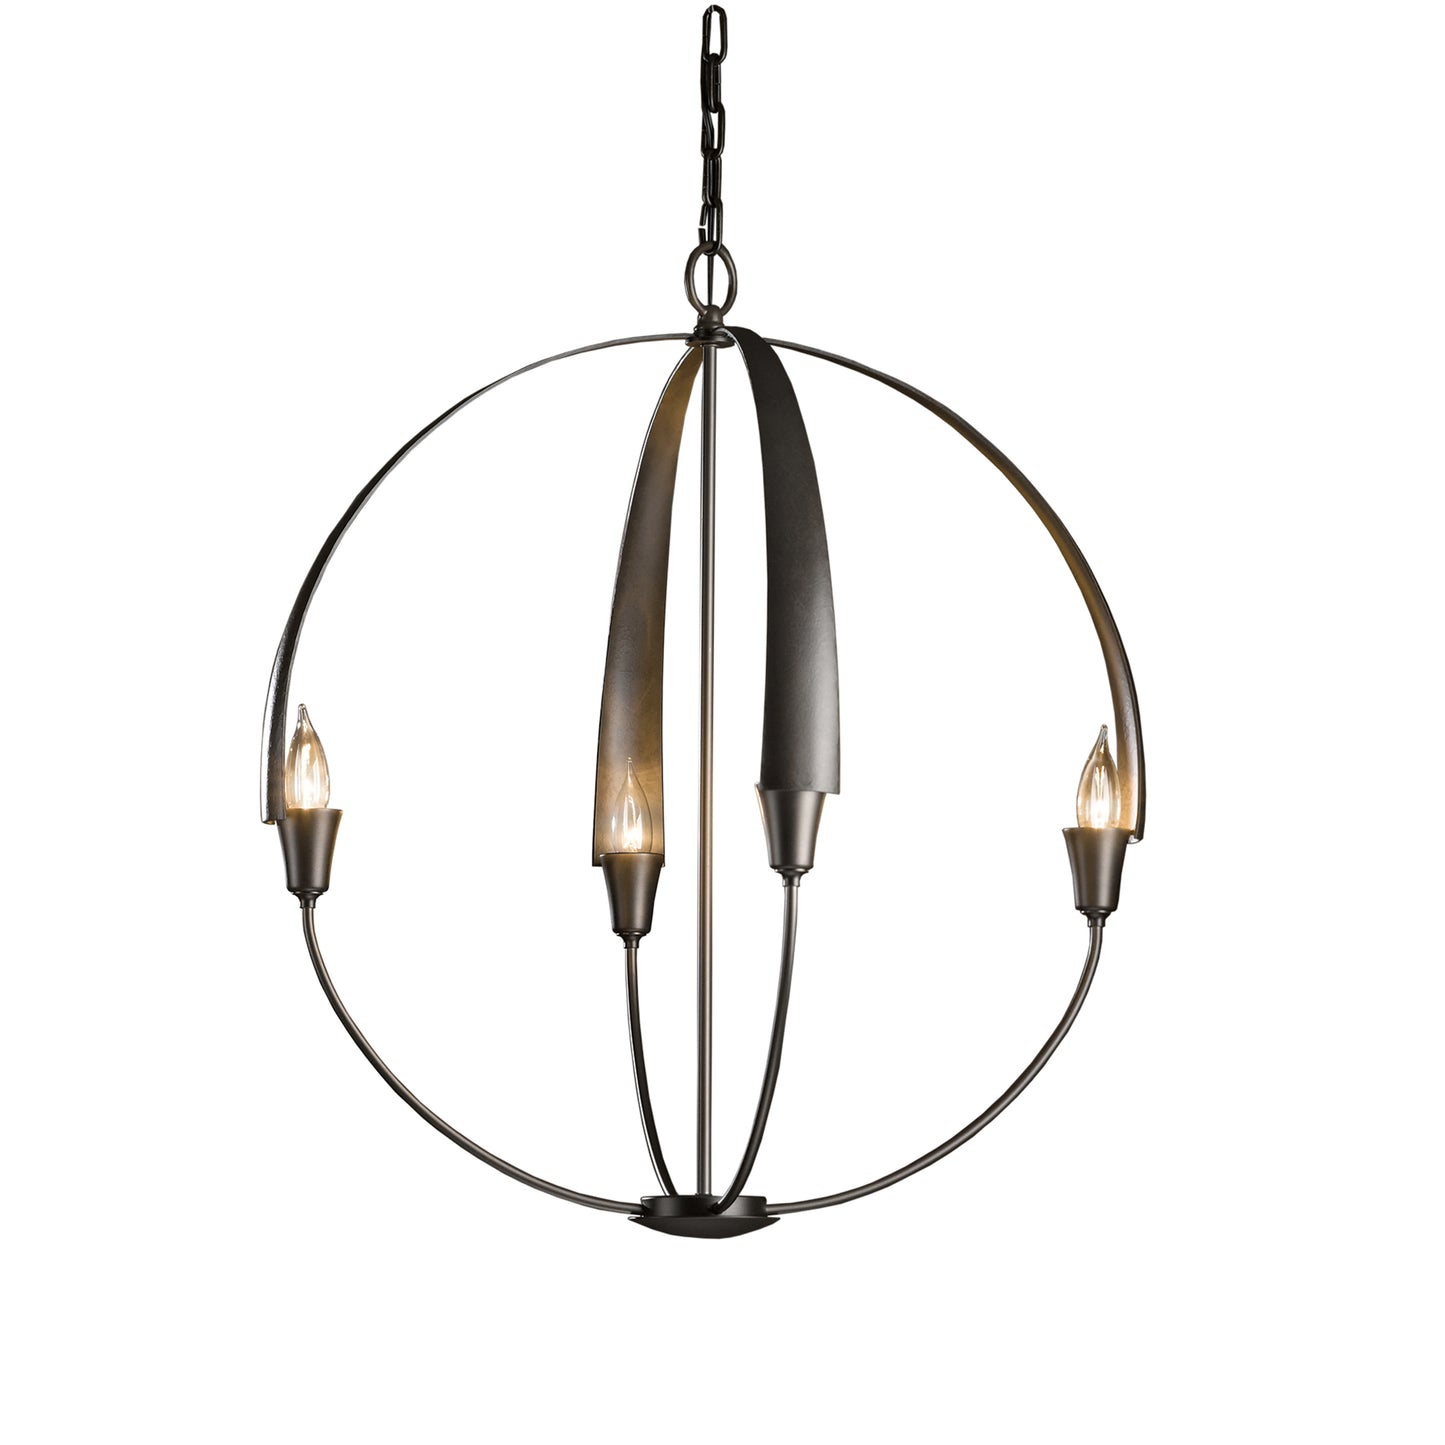 The Hubbardton Forge Cirque Chandelier is an elegant three-light chandelier featuring a sleek black finish, providing stylish illumination to any space.